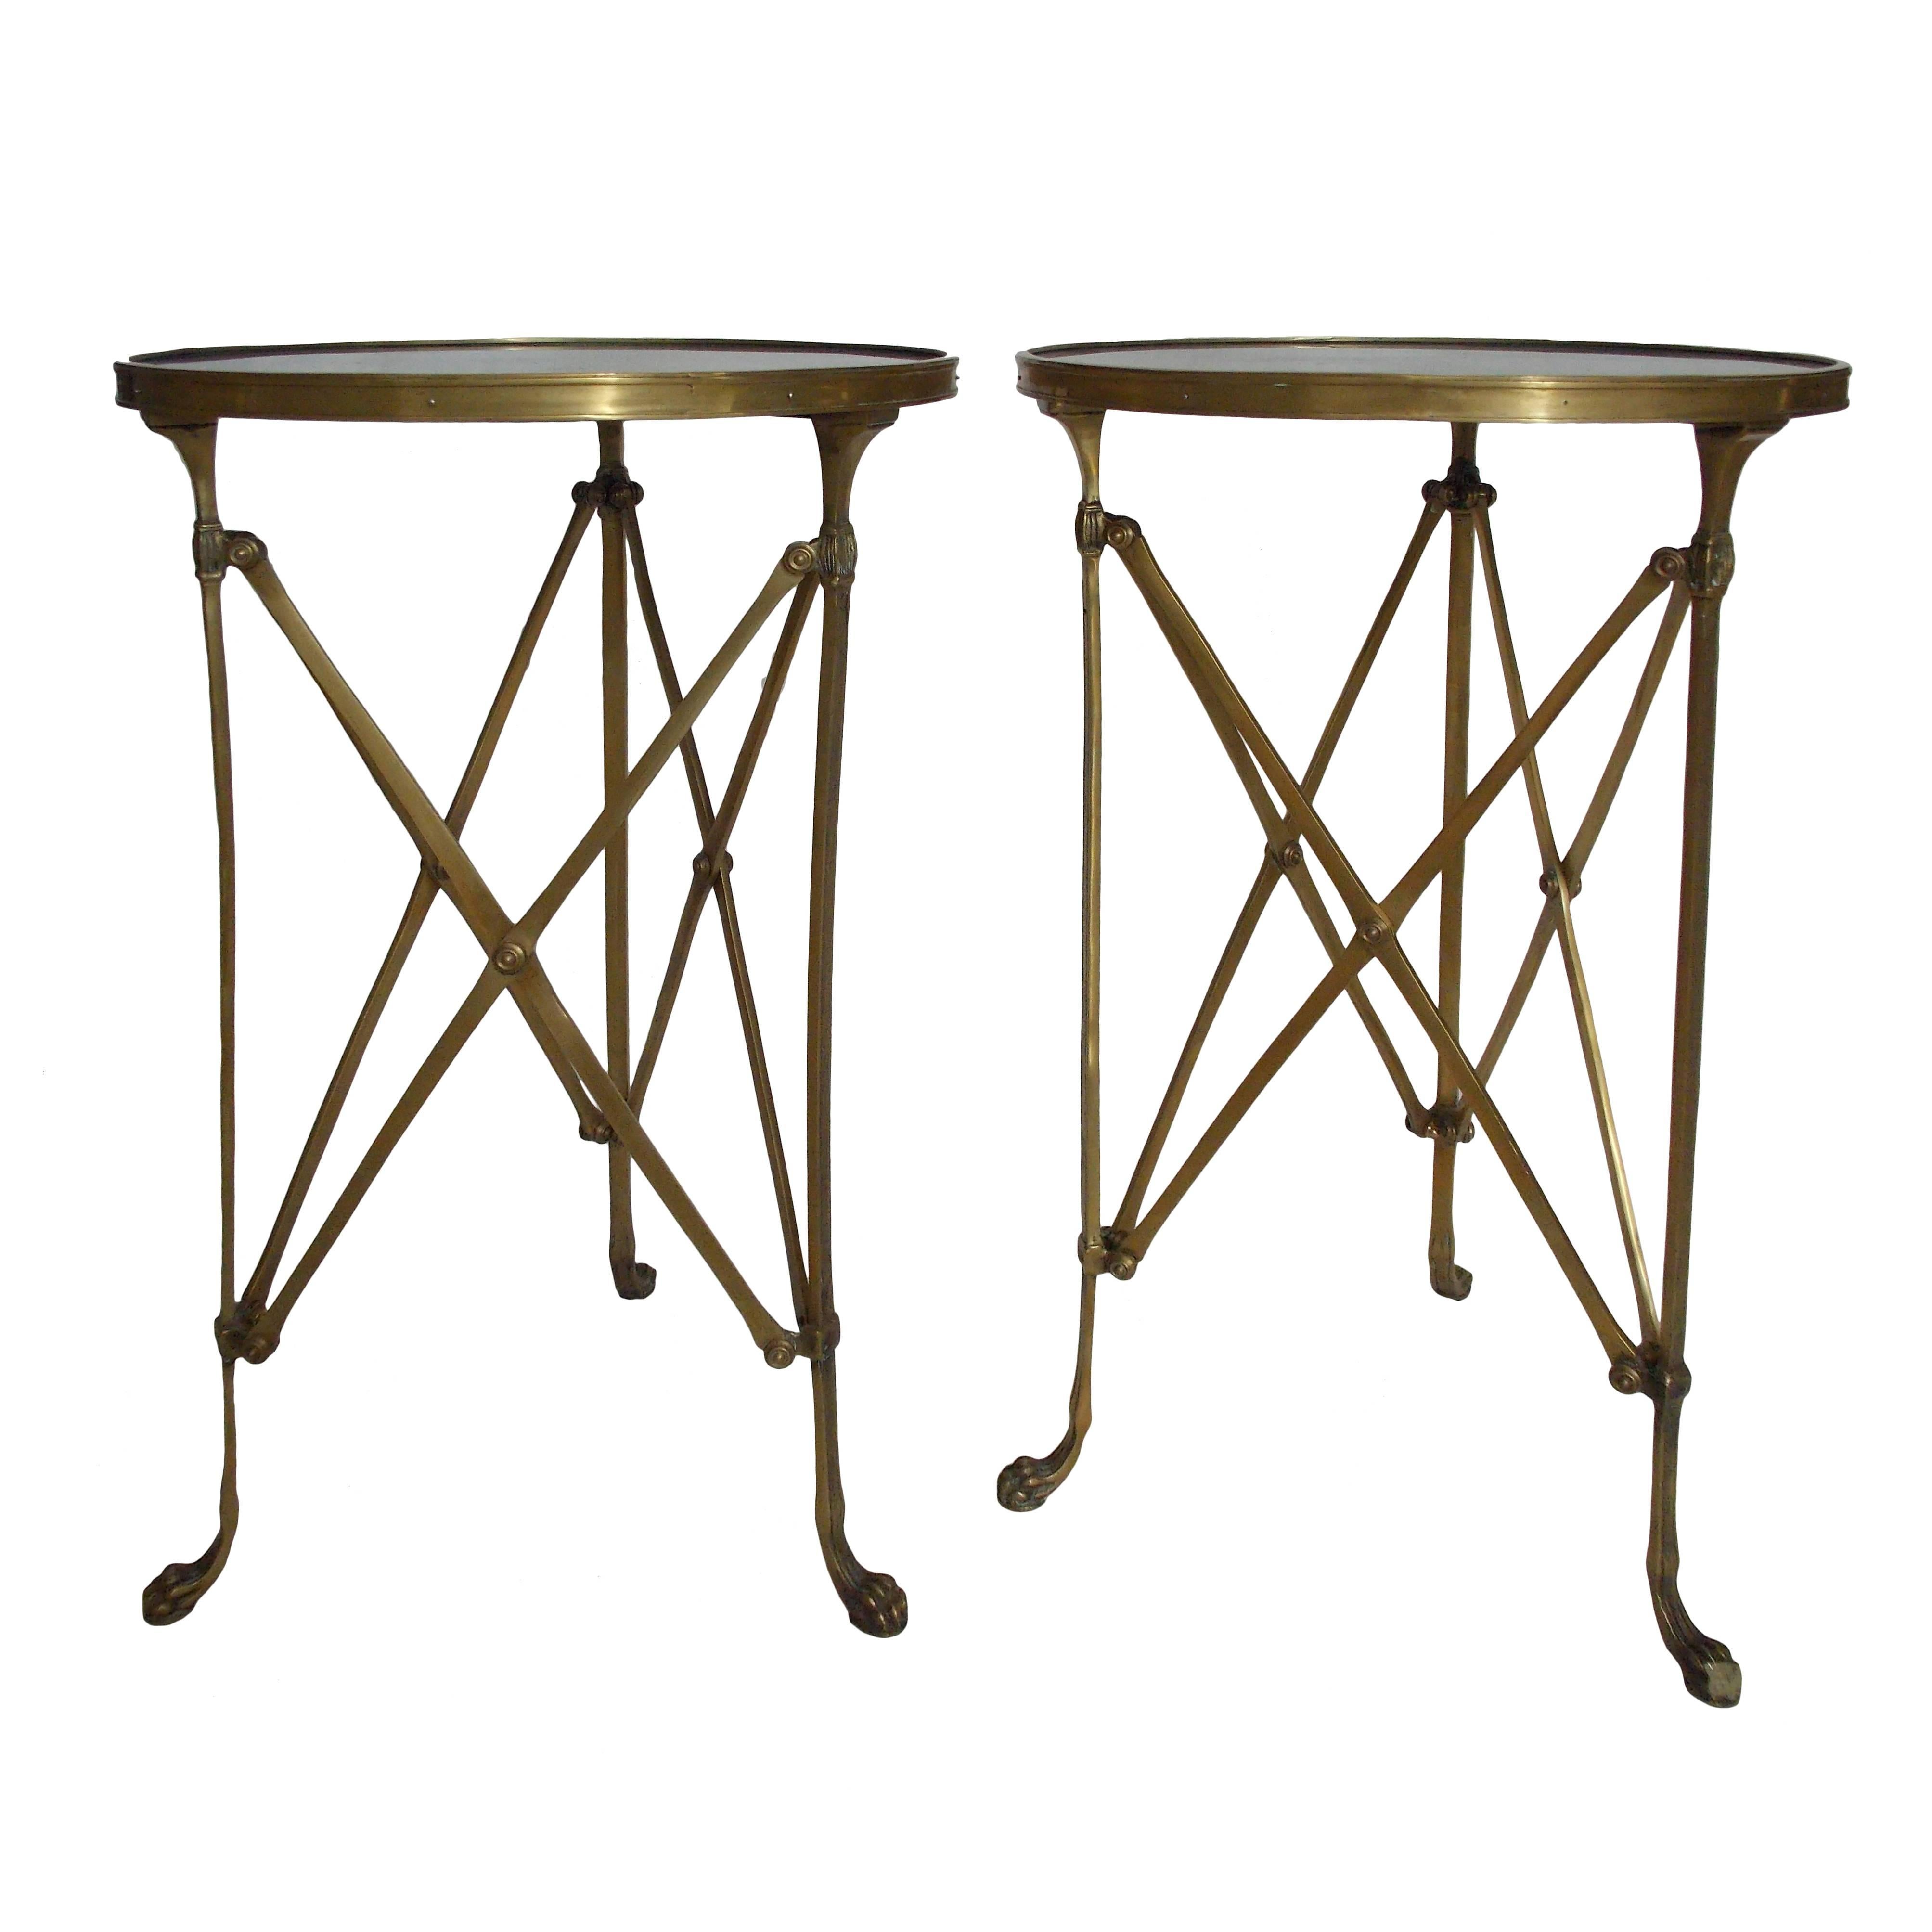 Pair of French Brass Neoclassical Gueridon Tables in the Jansen Manner